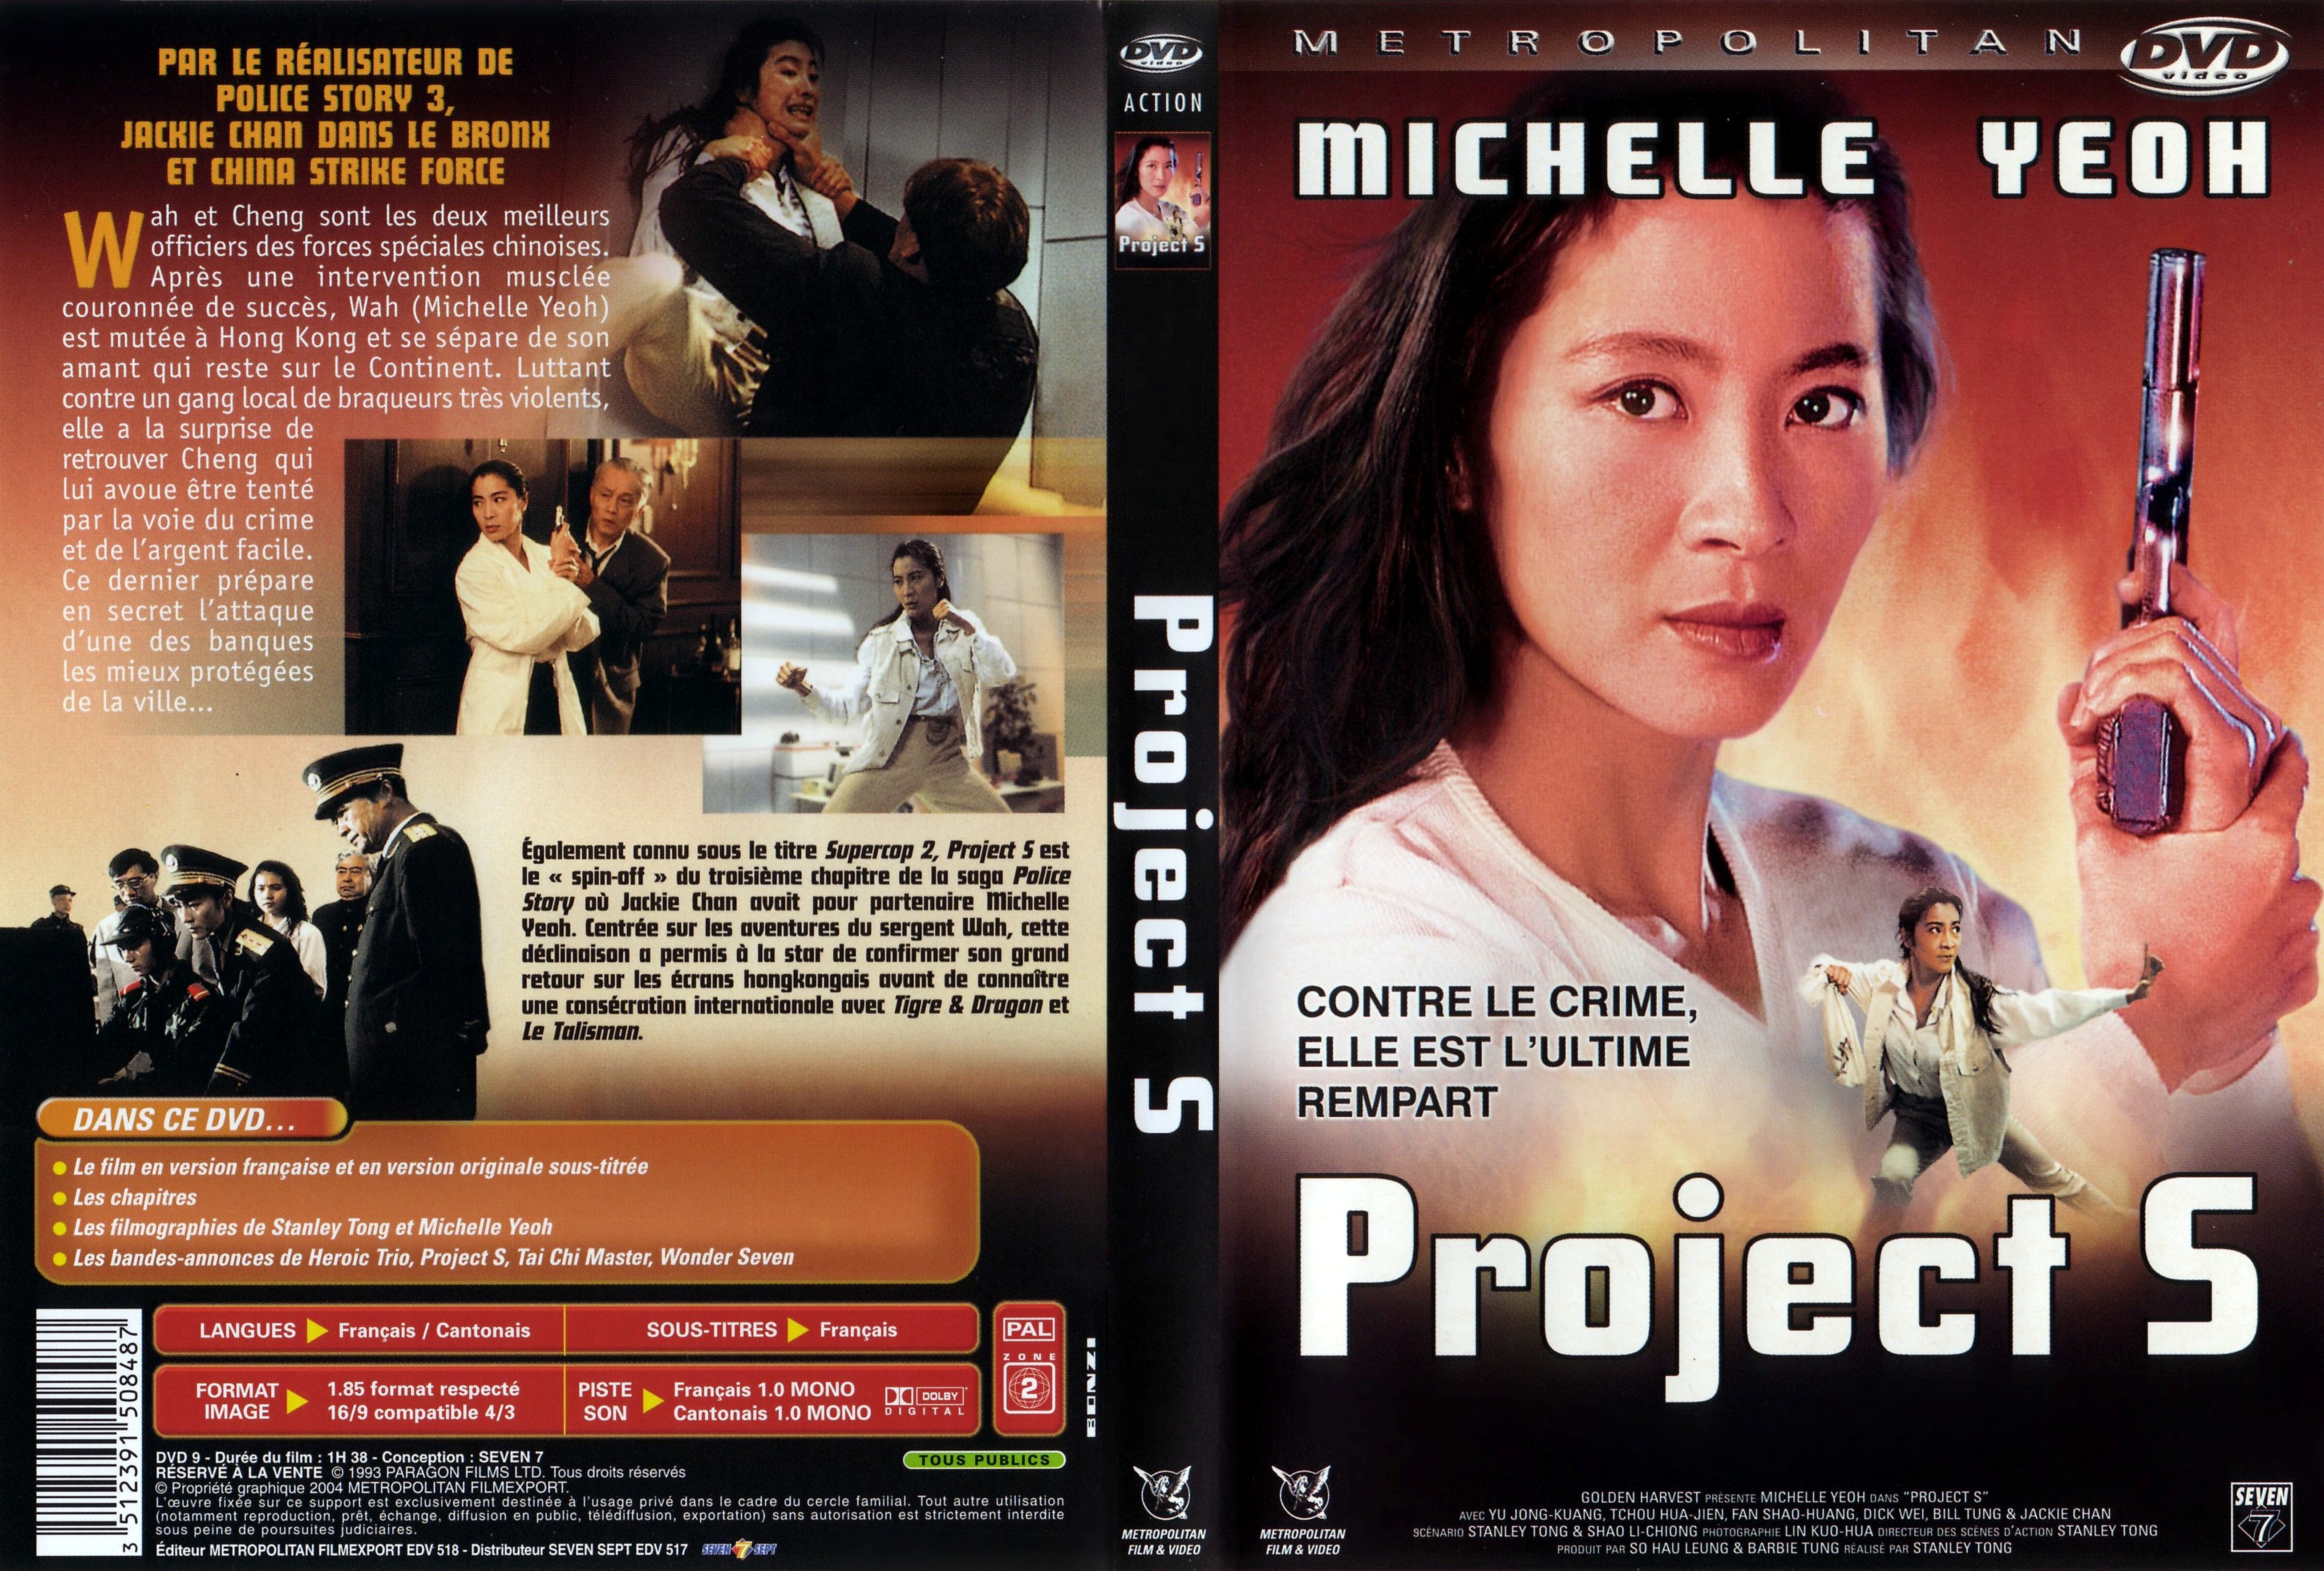 Jaquette DVD Project S